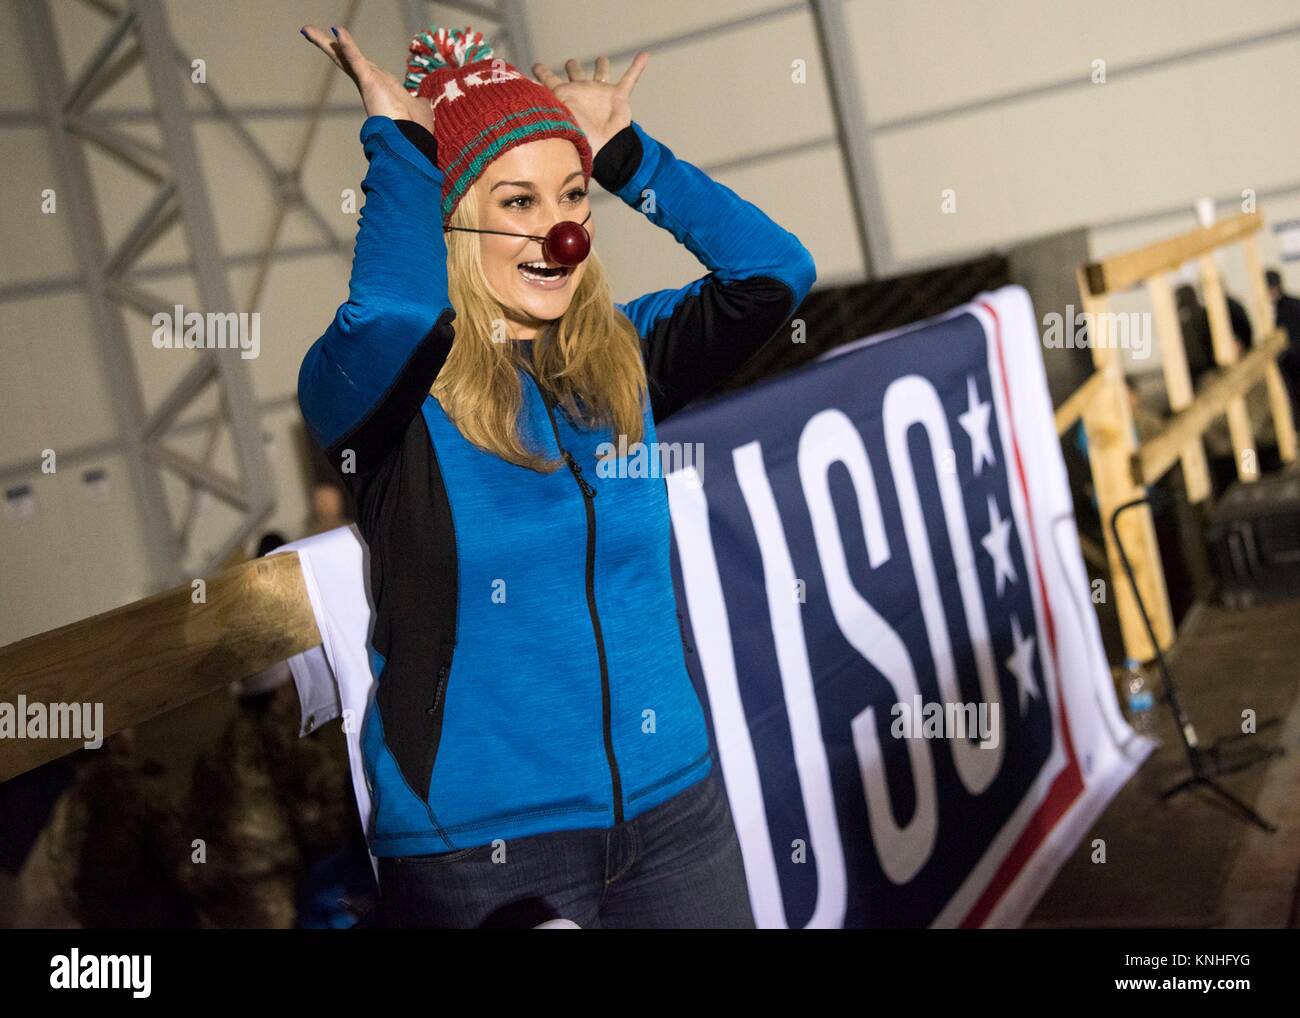 Country music singer Kellie Pickler wears a Rudolph the Red-Nosed Reindeer nose while performing for U.S. troops during the CJCS USO Holiday Tour December 25, 2016 in Iraq. (photo by PO2 Dominique A. Pineiro  via Planetpix) Stock Photo